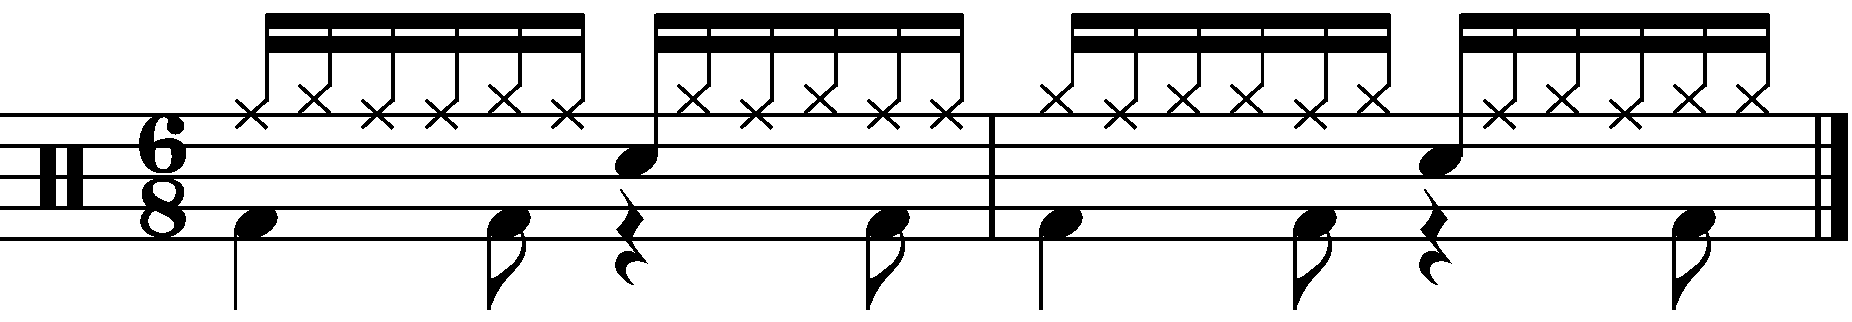 A 6/8 paradiddle groove